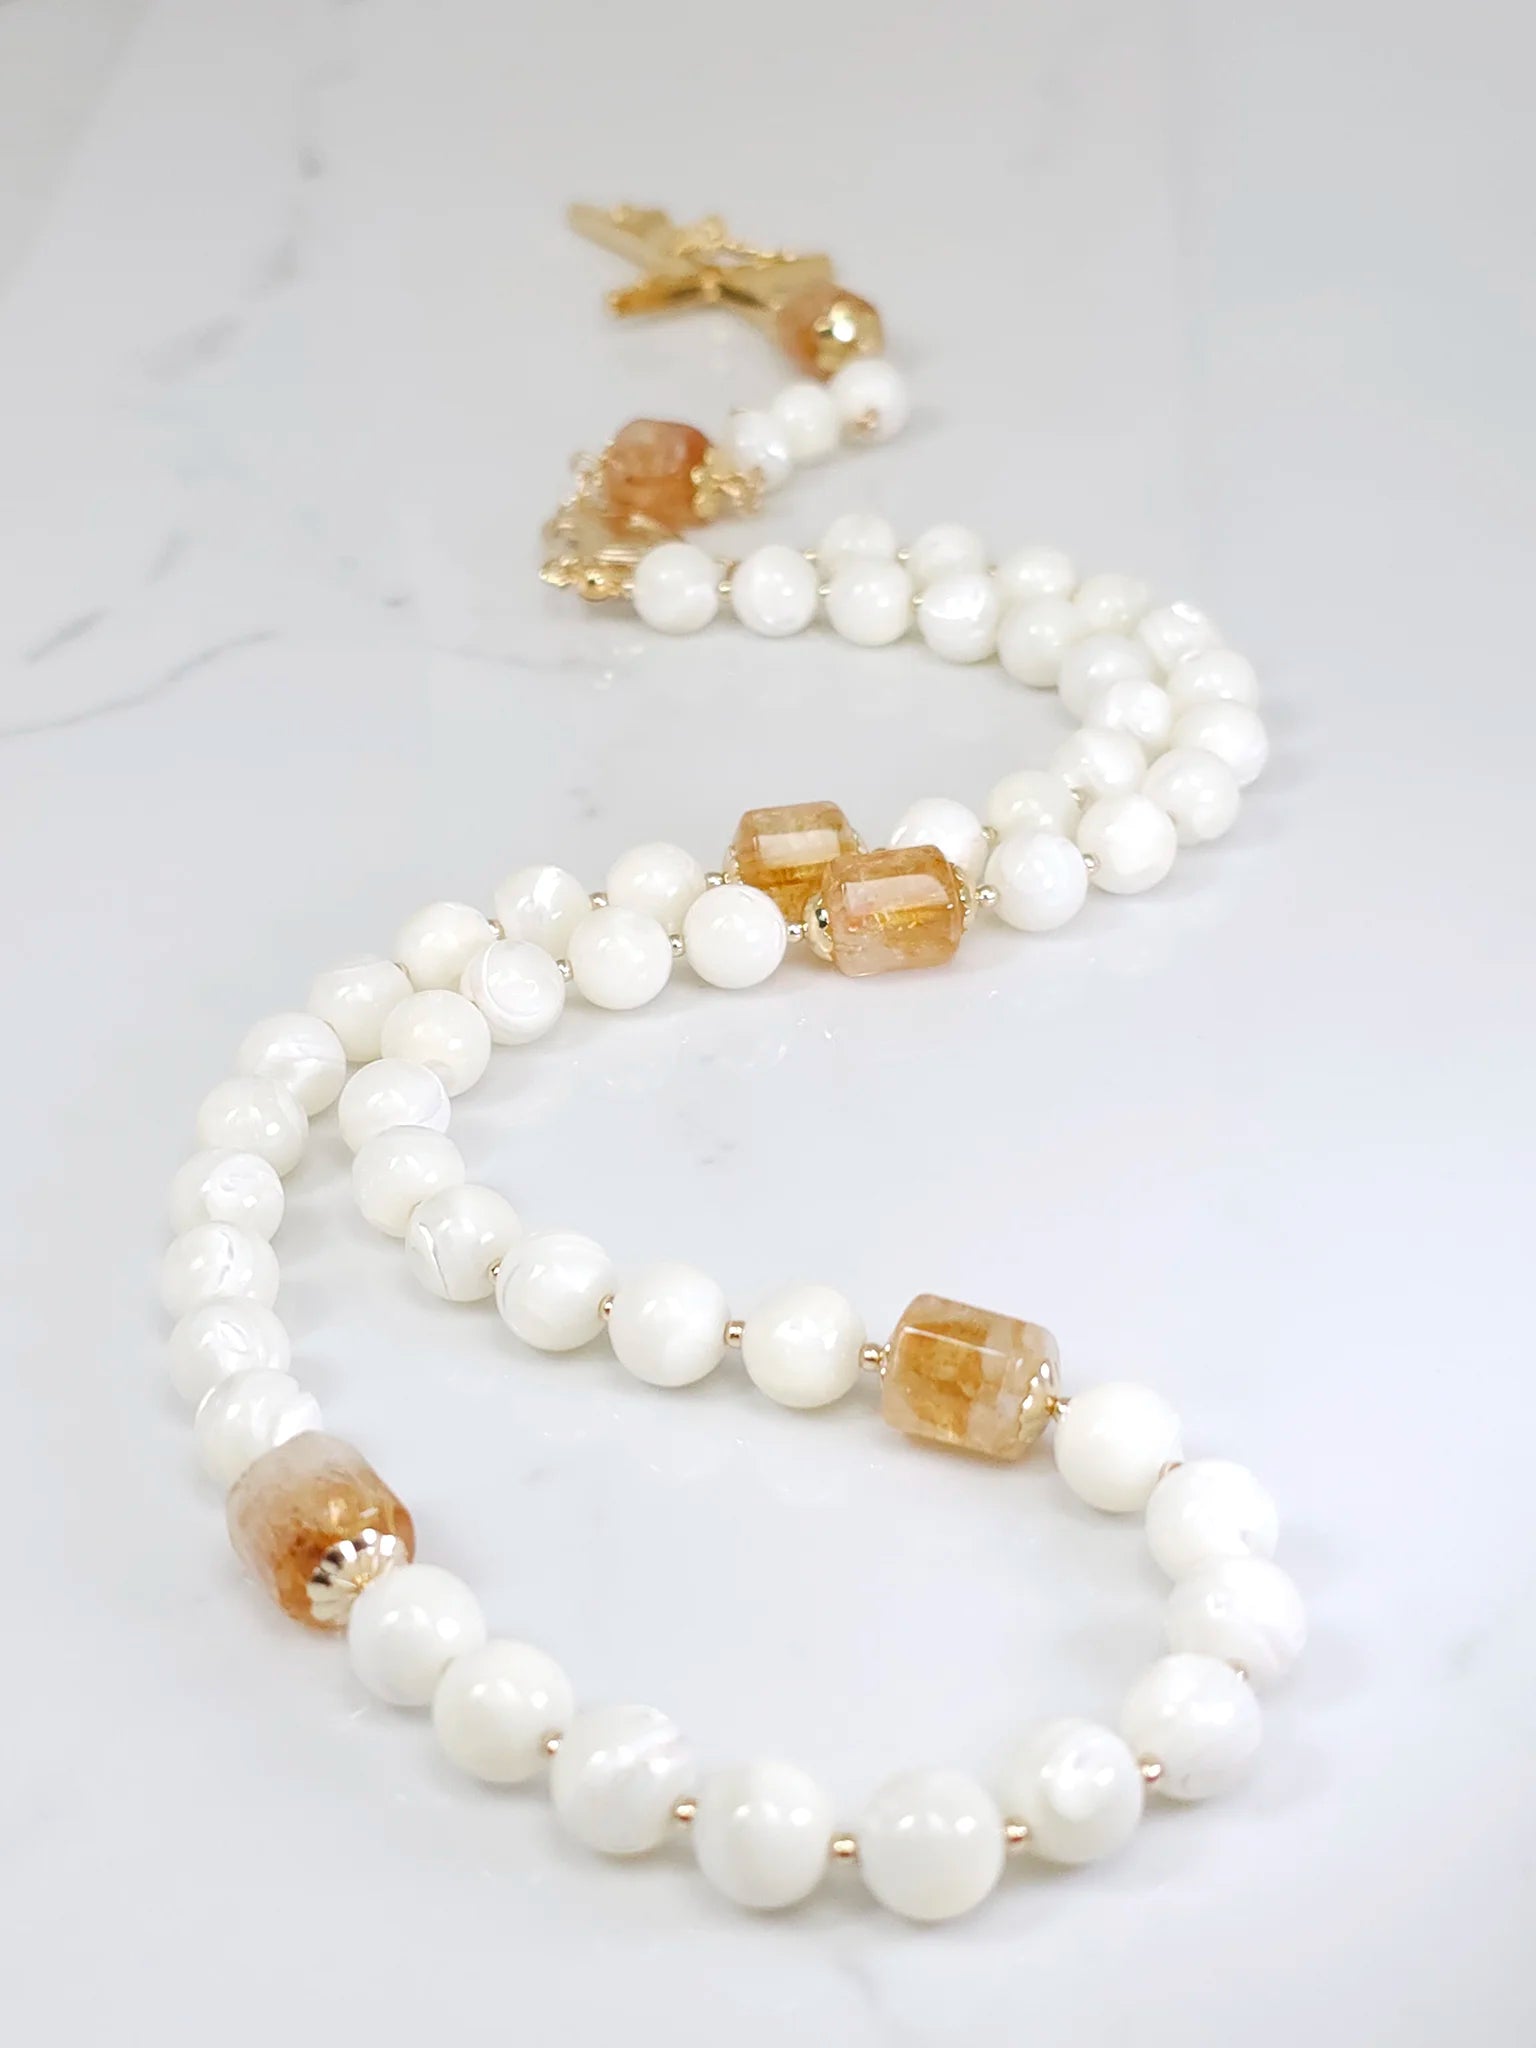 Rosary necklace blending of Mother of Pearl with luminous Citrine, featuring a Crucifix pendant, on a white table.